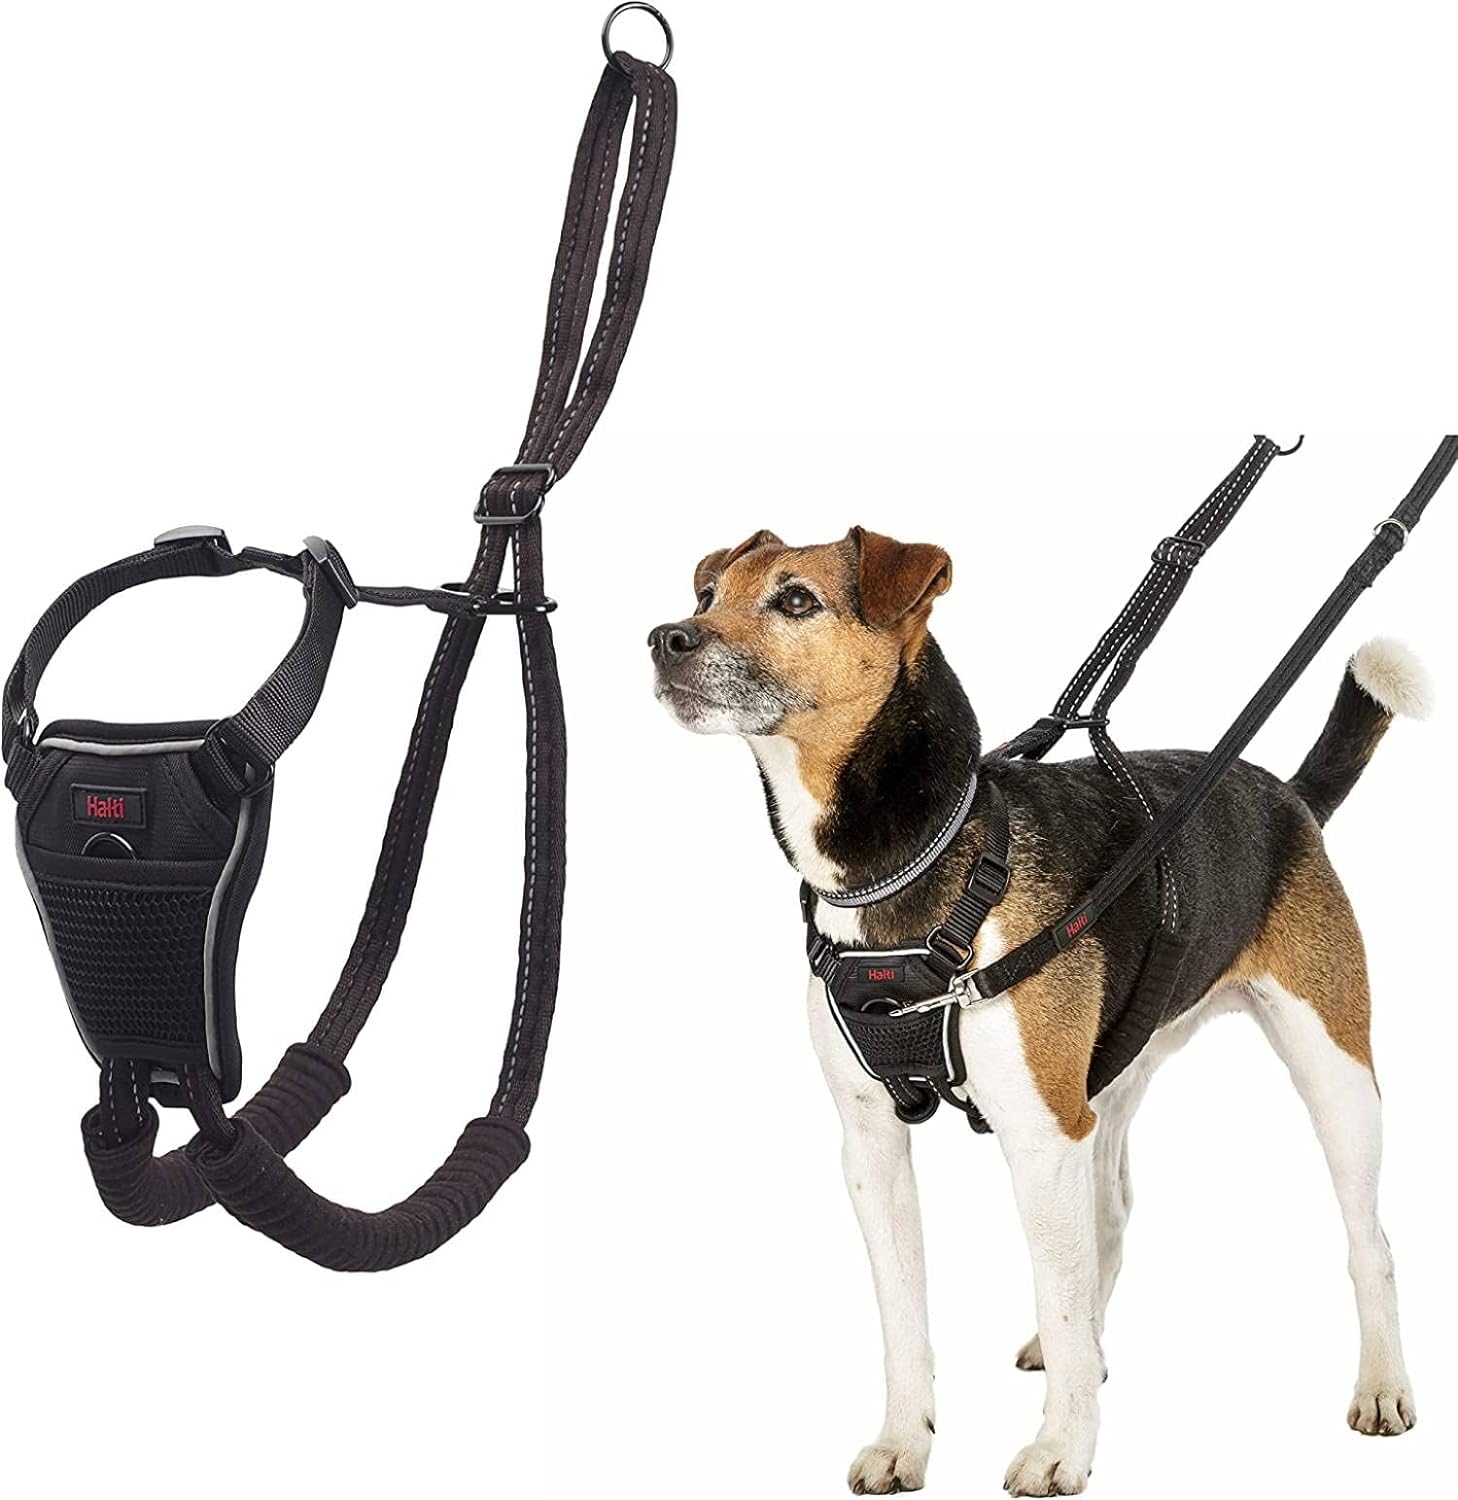 HALTI No Pull Harness - To Stop Your Dog Pulling on the Leash. Adjustable, Lightweight and Easy to Use. Reflective Dog Training Harness for Small Dogs (Size S)